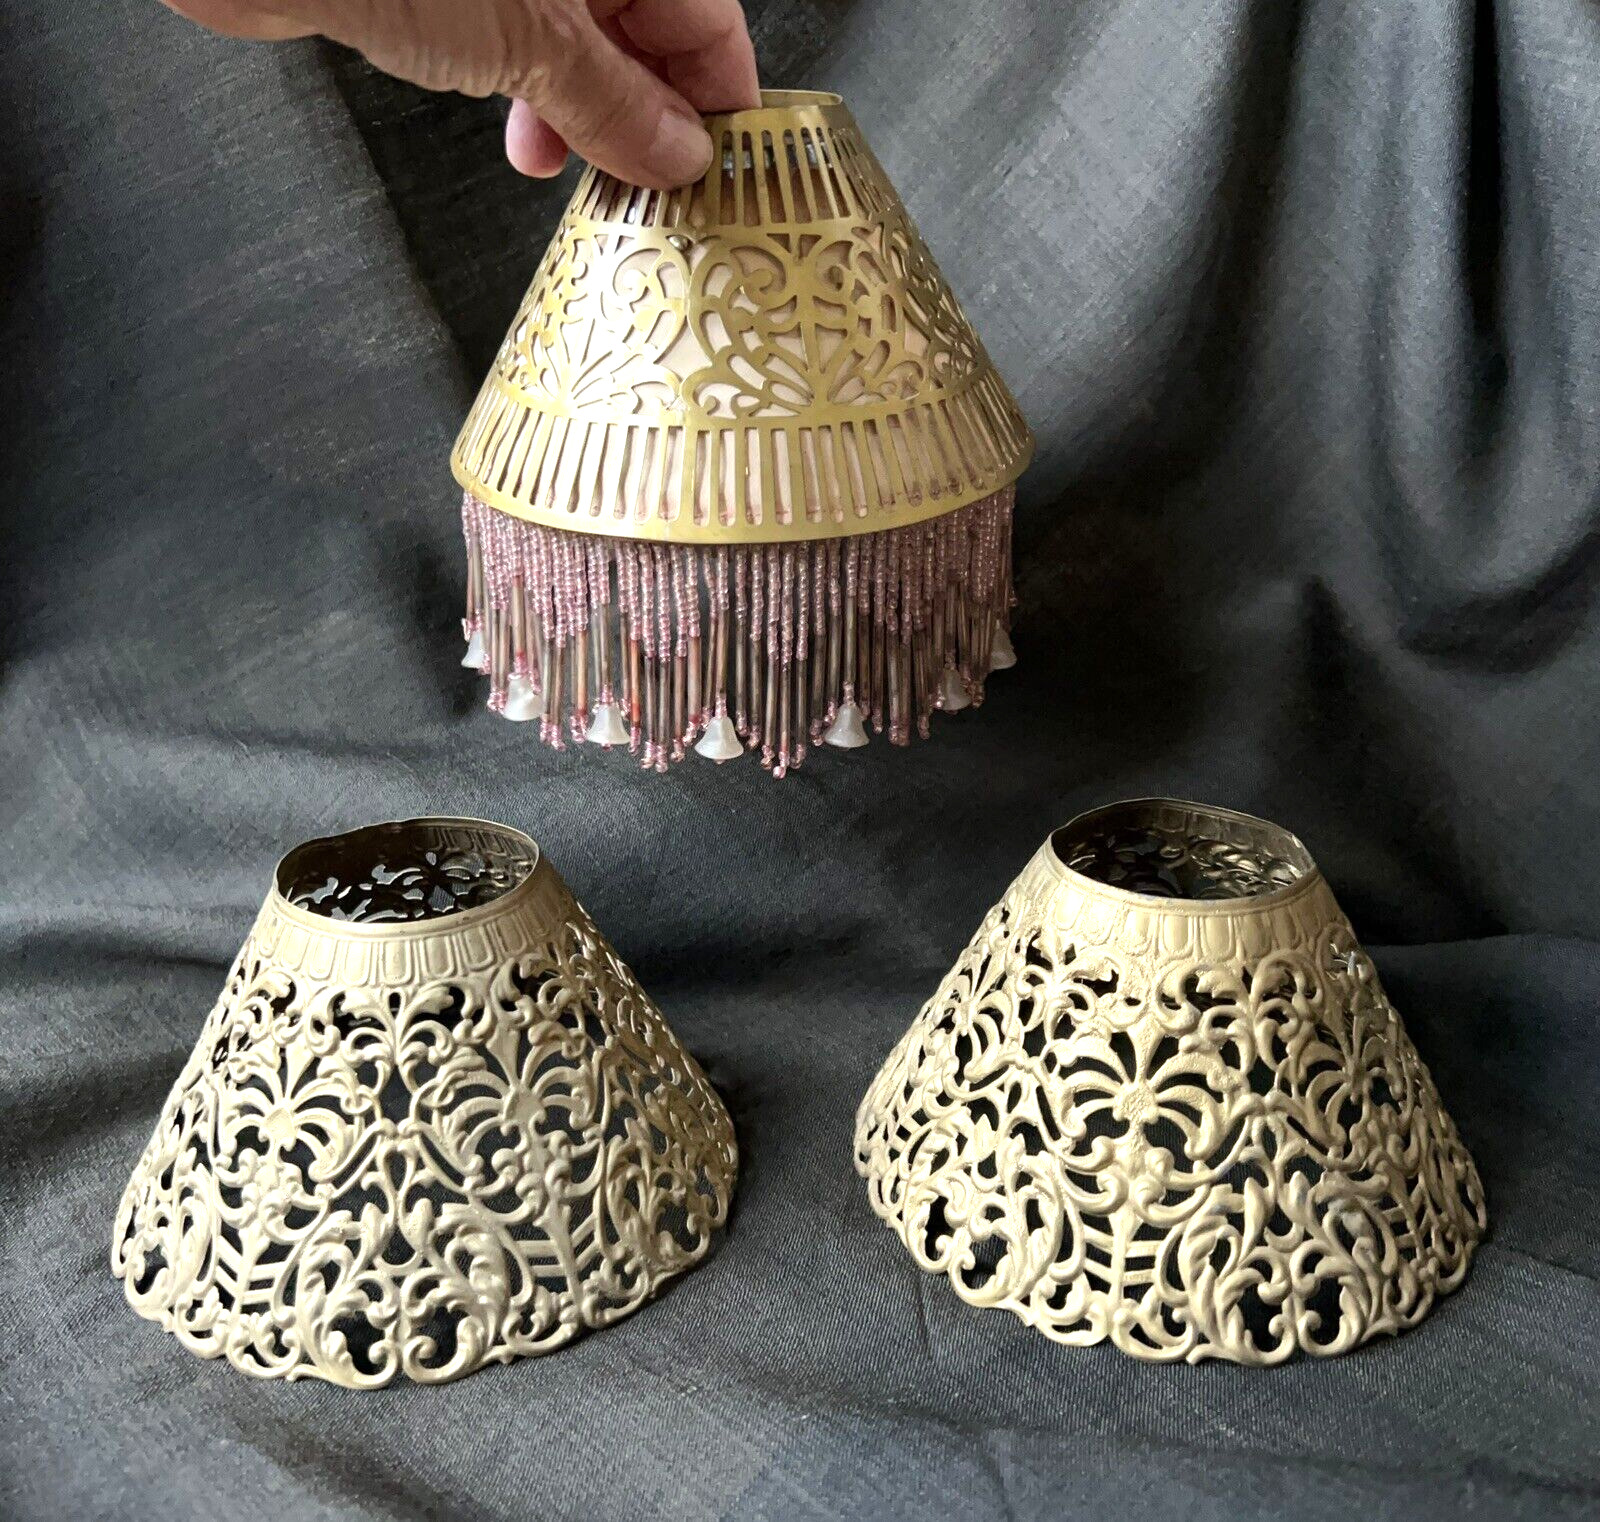 Antique  Reticulated/Pierced Art Nouveau Metal Lamp Shades, Beaded Fringe Insert